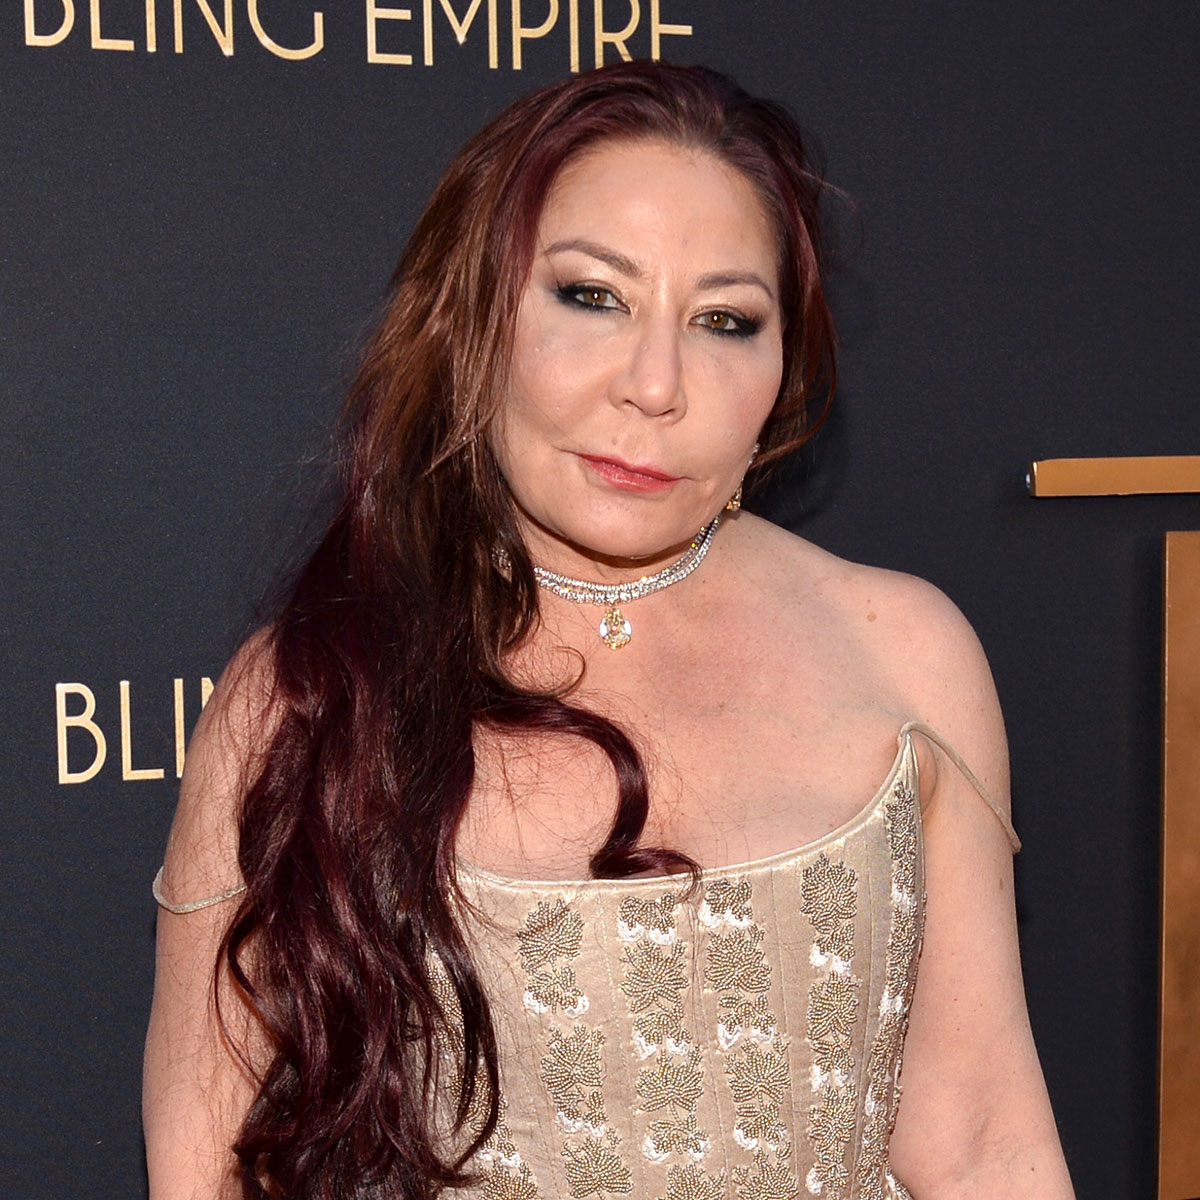 Bling Empire’s Anna Shay Dead at 62 After Stroke